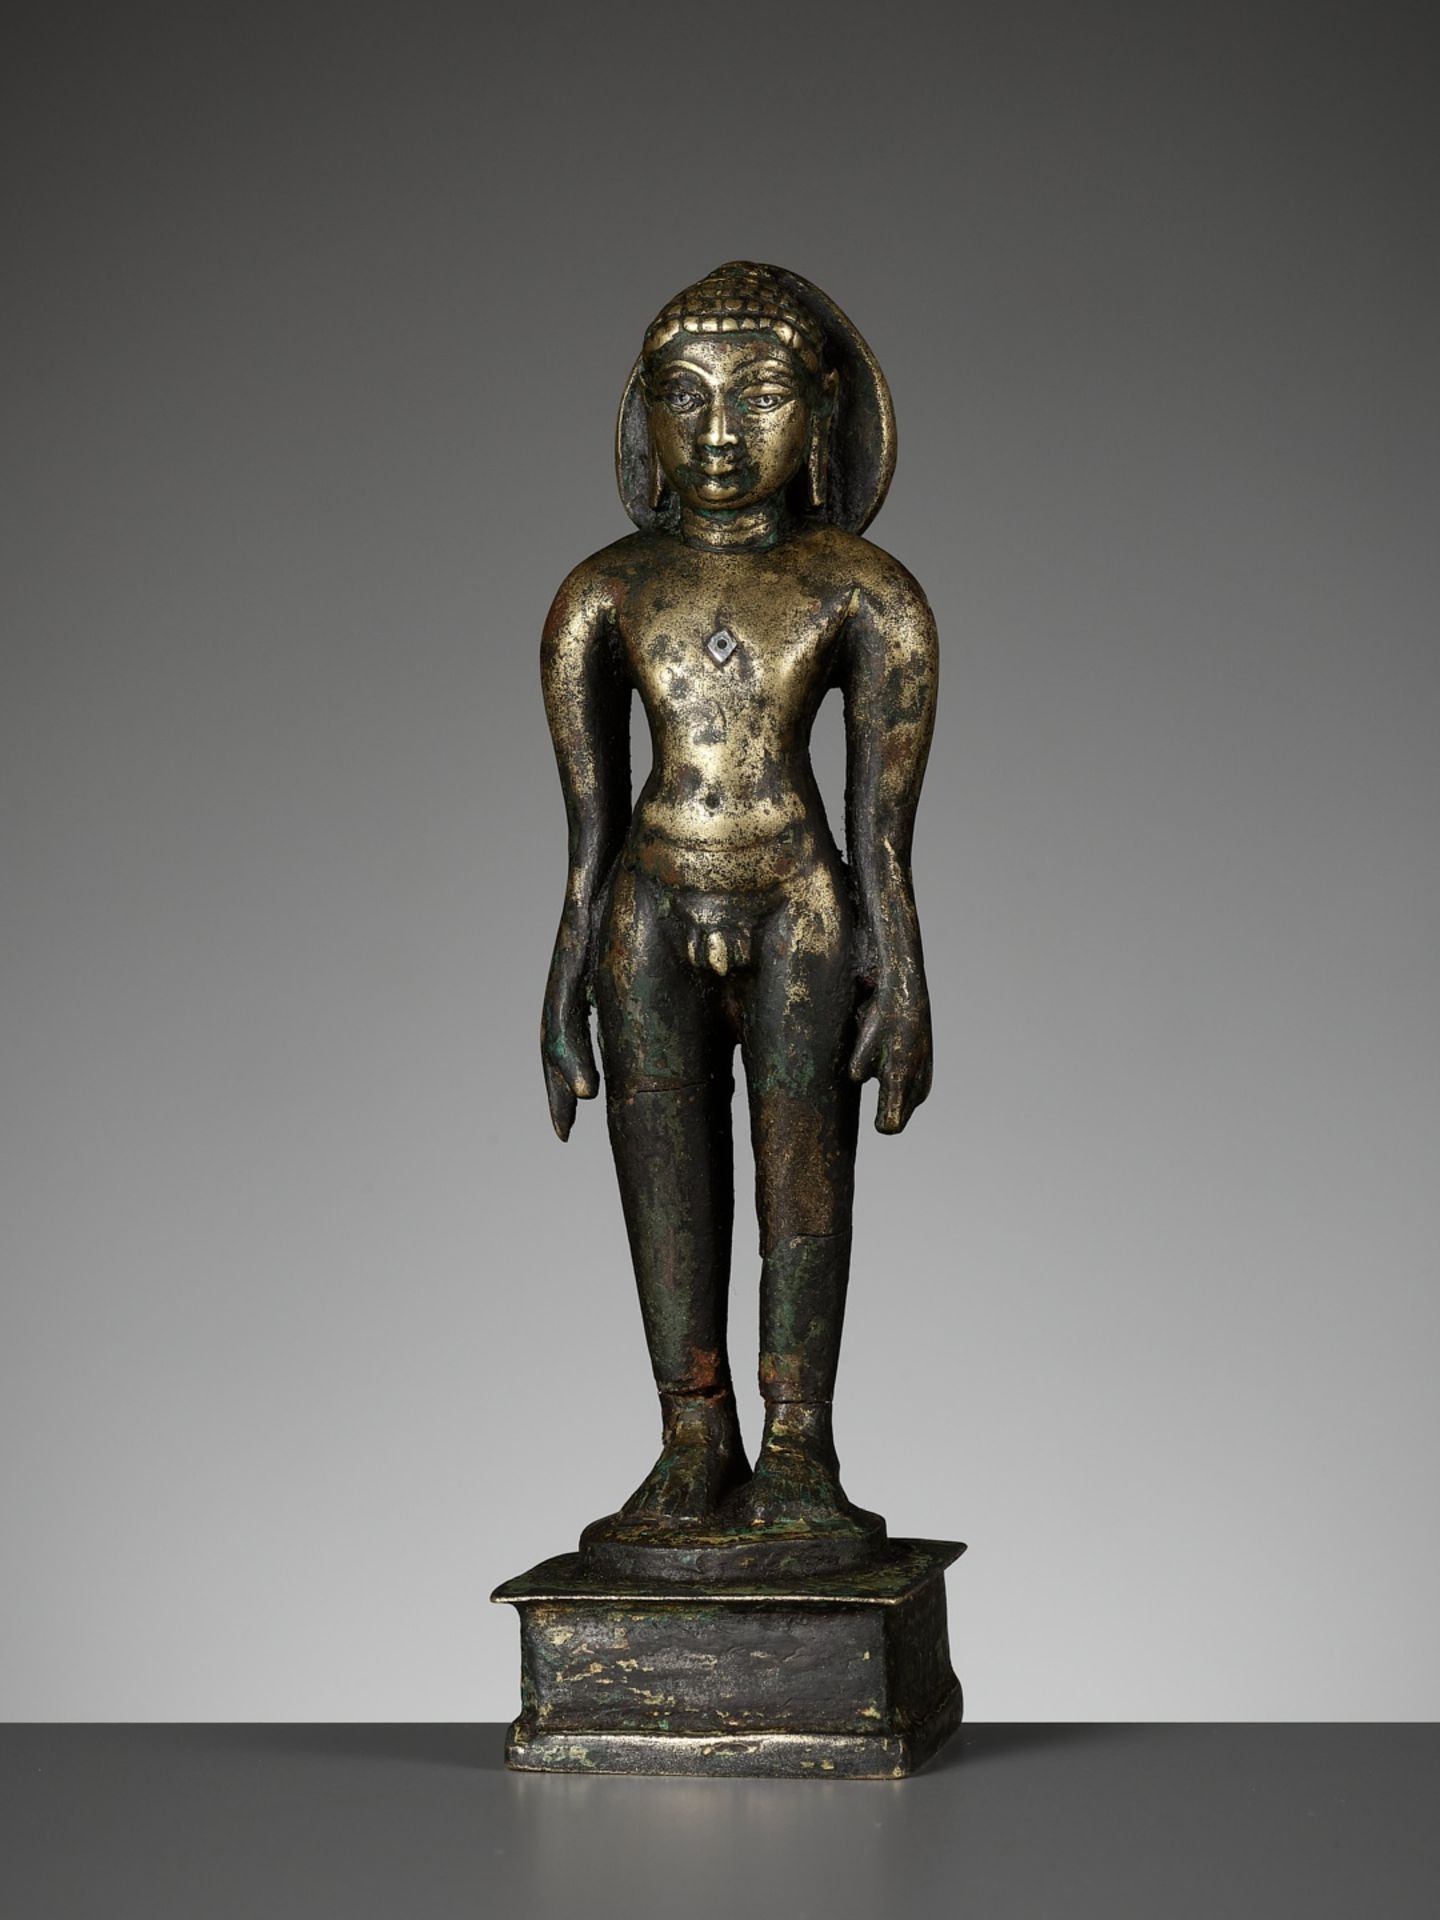 A SILVER-INLAID BRONZE FIGURE OF A JINA, SOUTH INDIA, 10TH - 11TH CENTURY